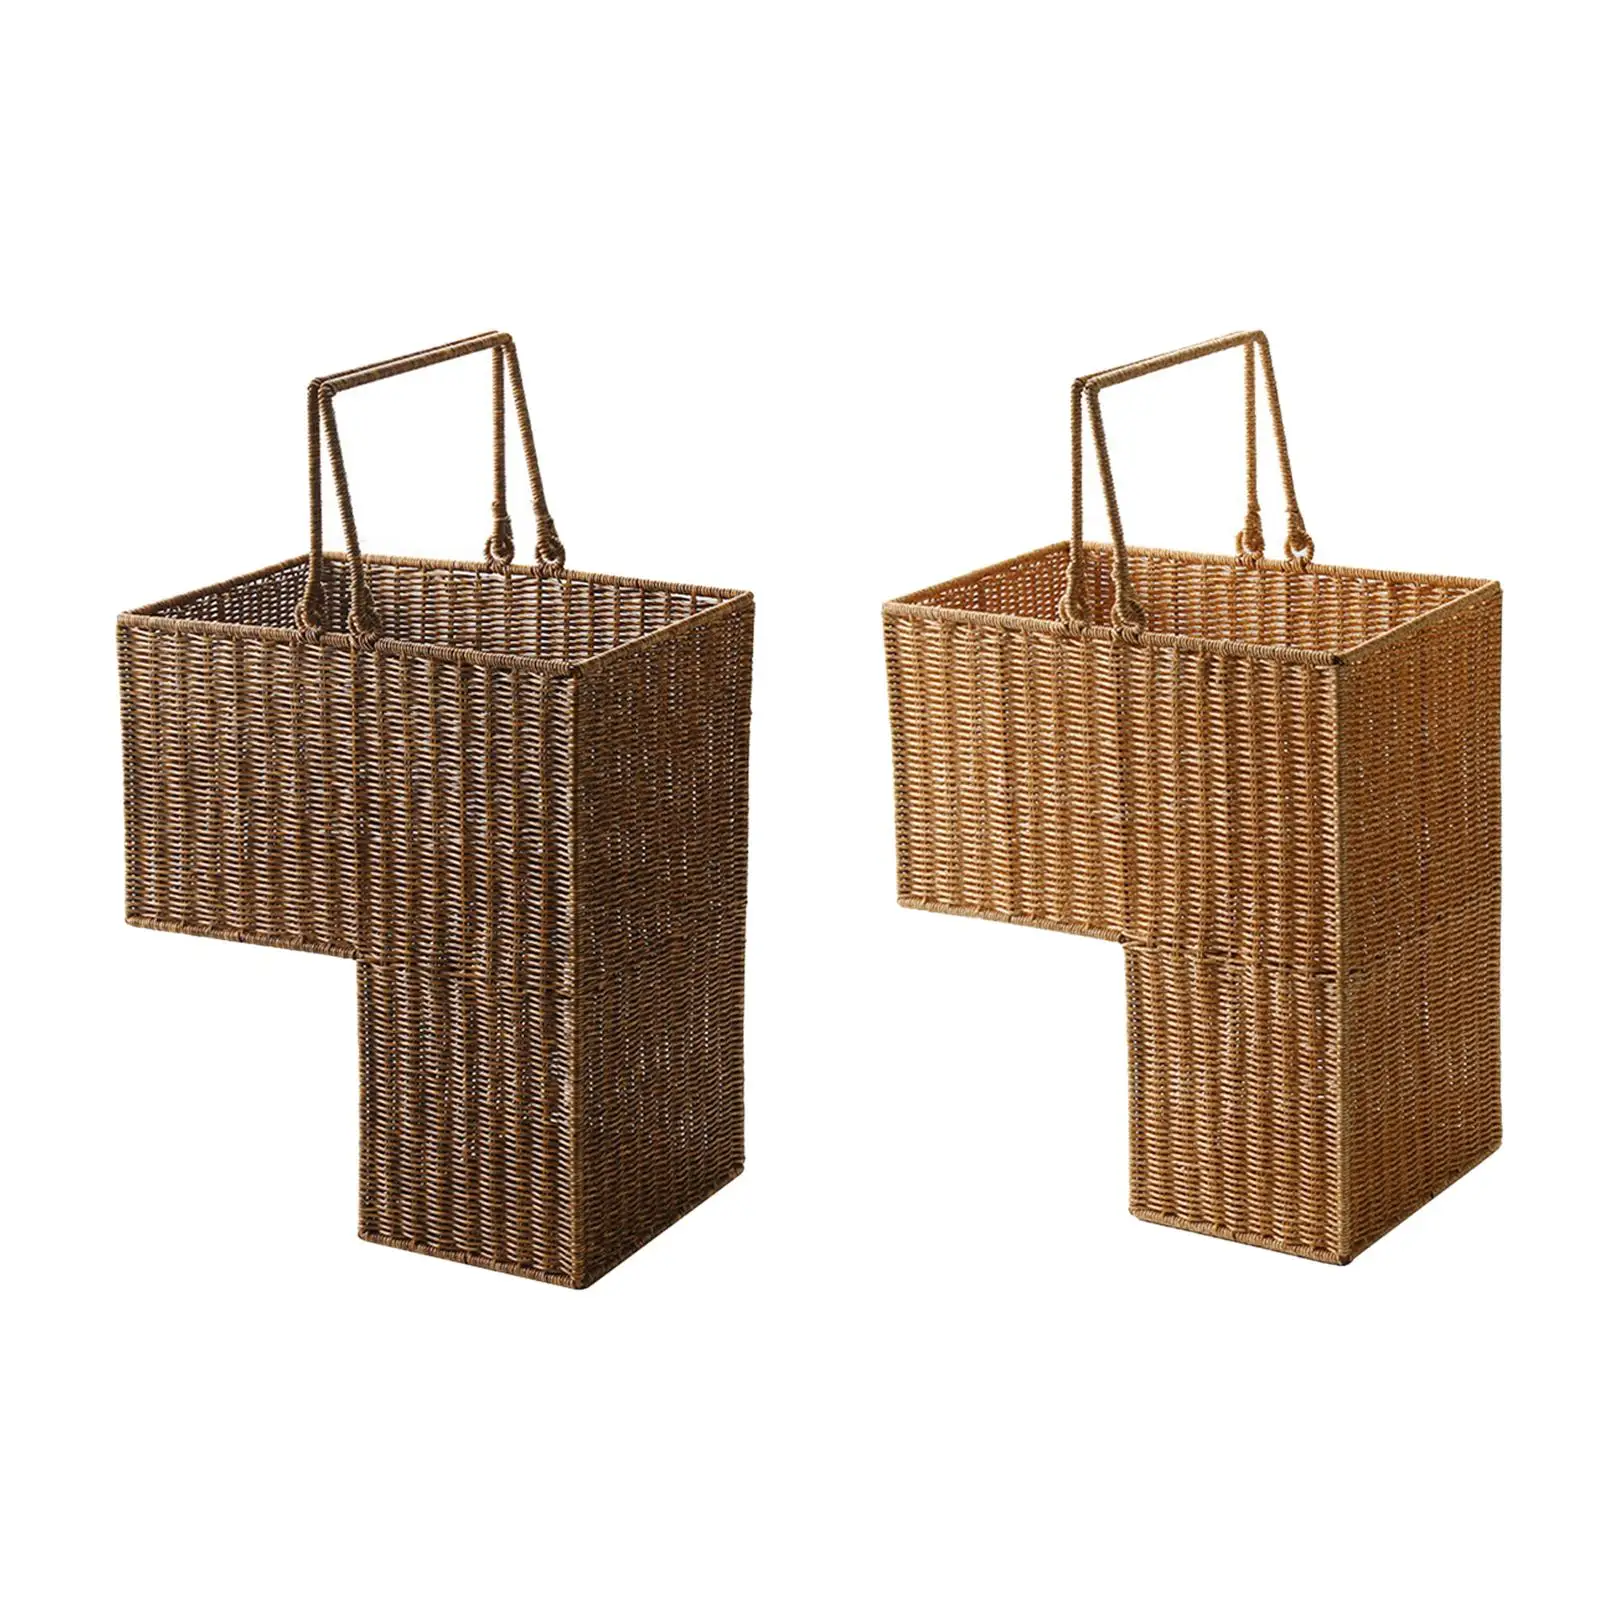 Stair Step Basket Sundries Organizer Multifunctional with Handle Handwoven for Cosmetics Books Home Decorative Patio Bedroom